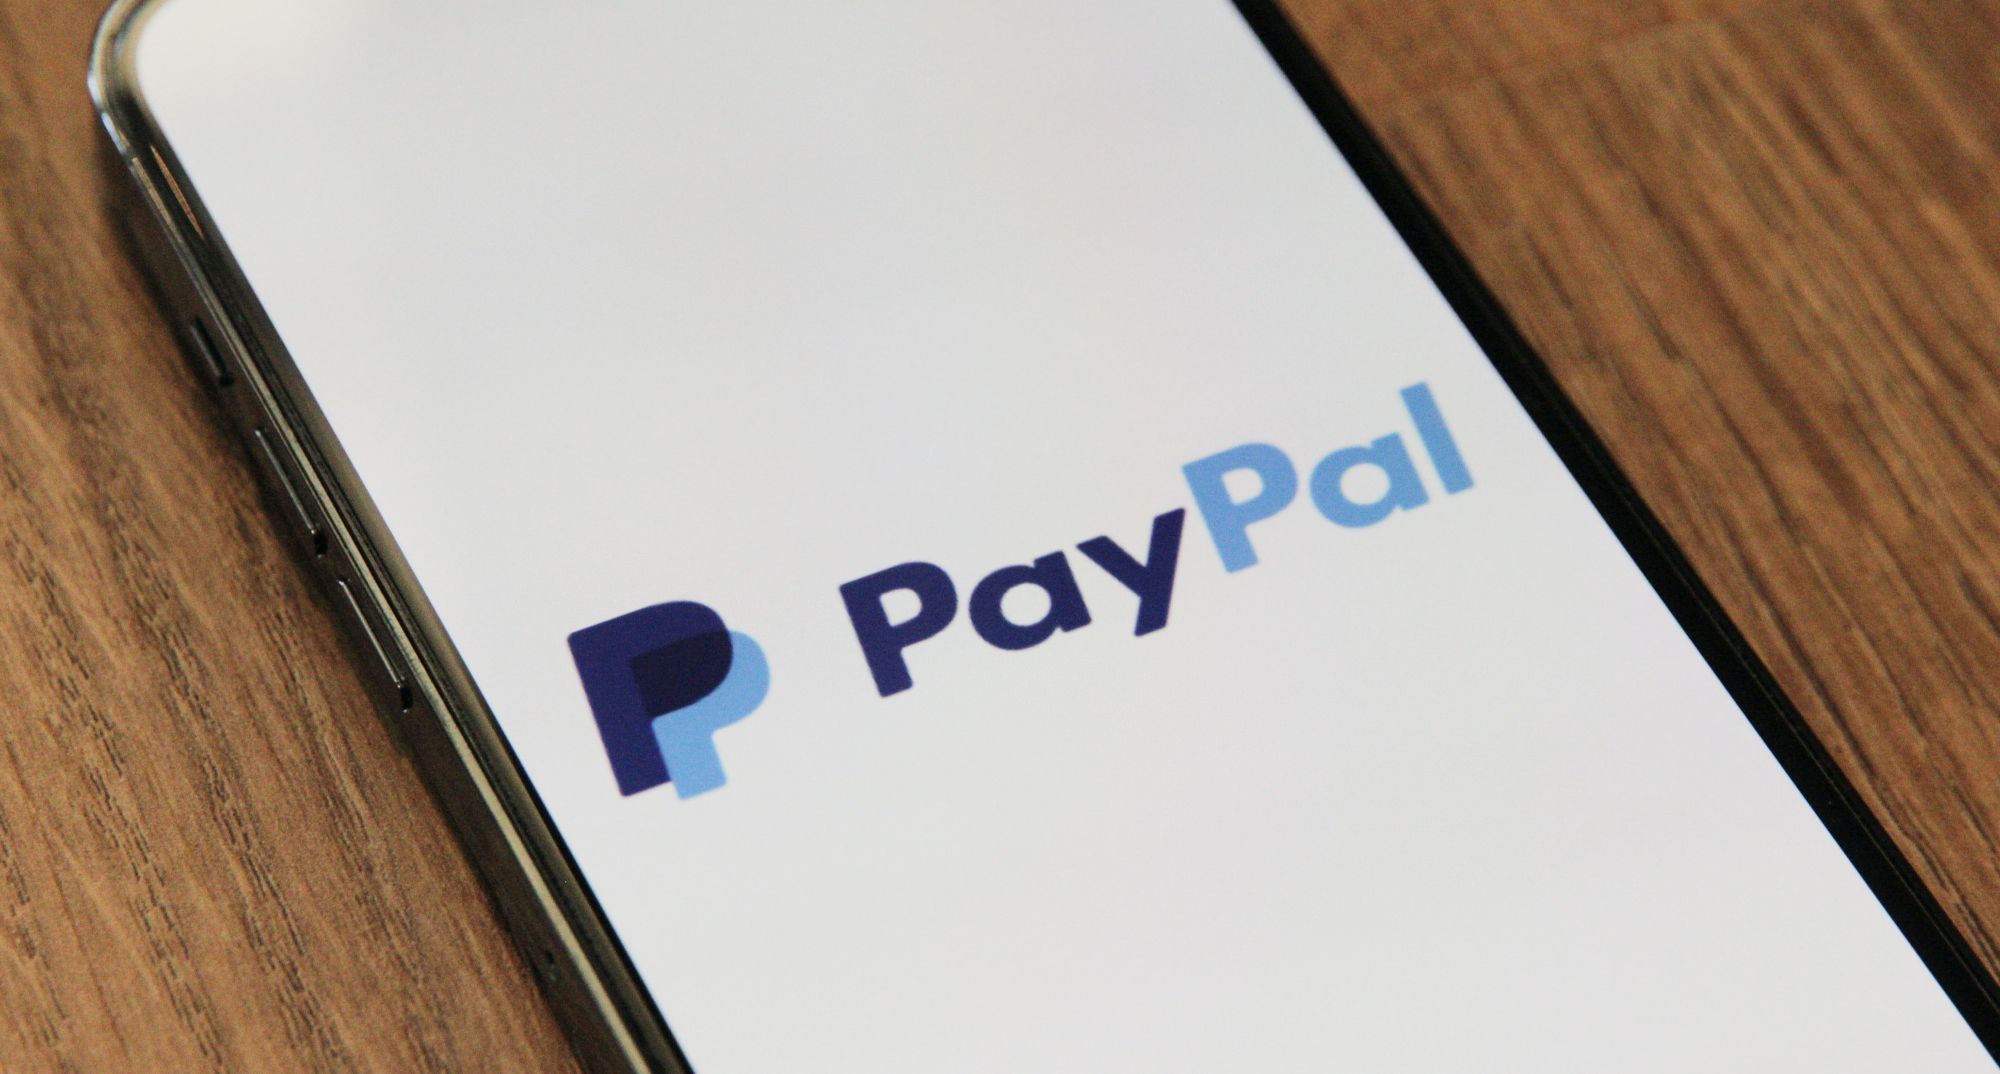 paypal app opening page on smartphone 